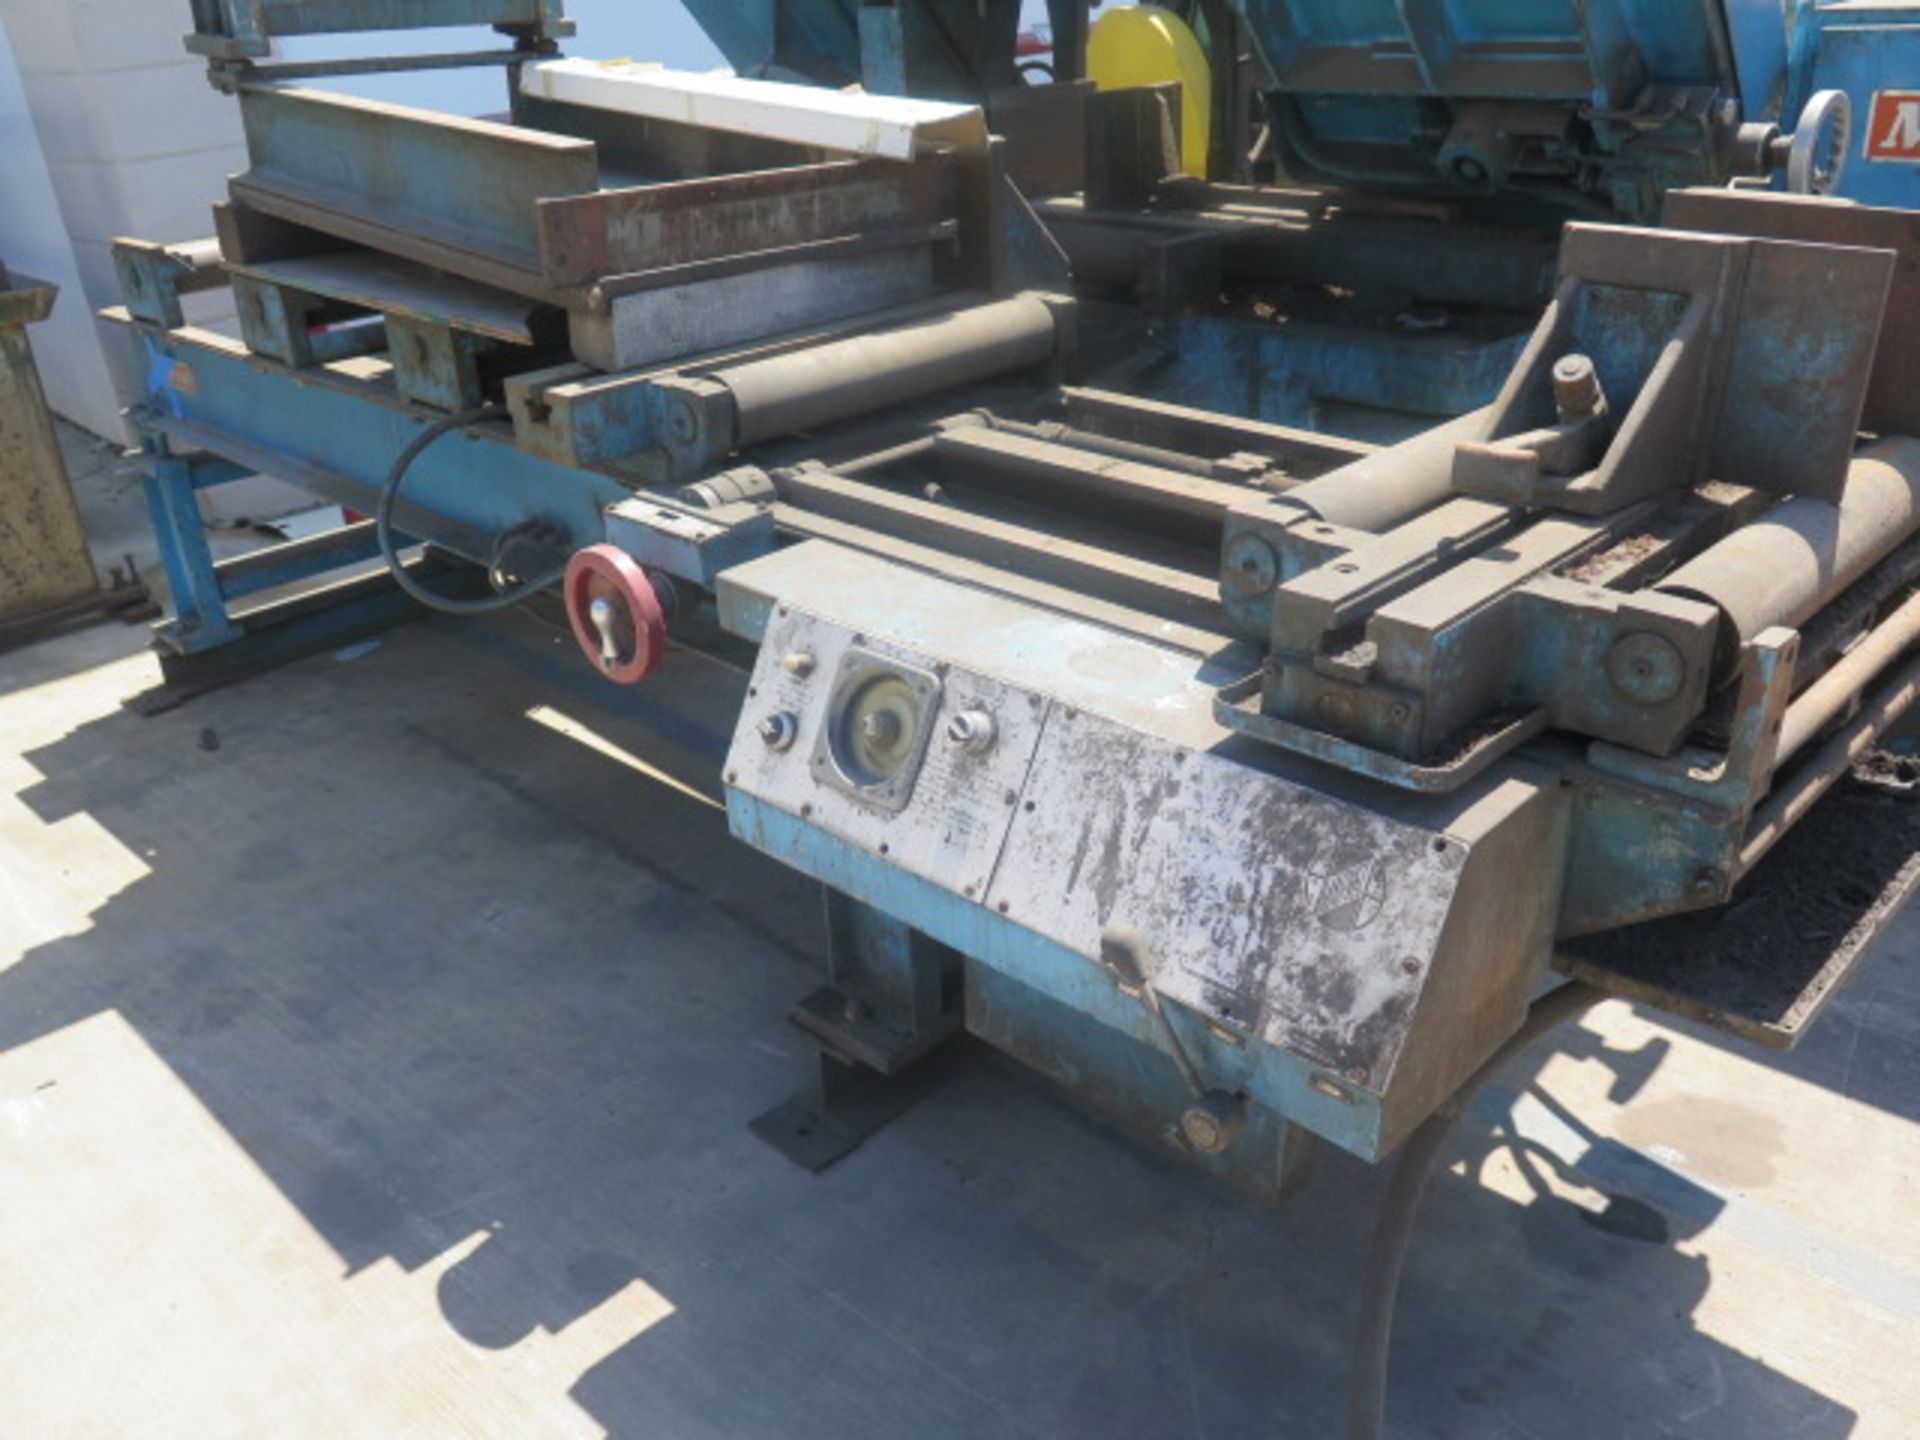 Marvel Series 15 mdl. 15A 15” Hydraulic Horizontal Band Saw s/n D-15638 w/ Marvel Controls - Image 6 of 7